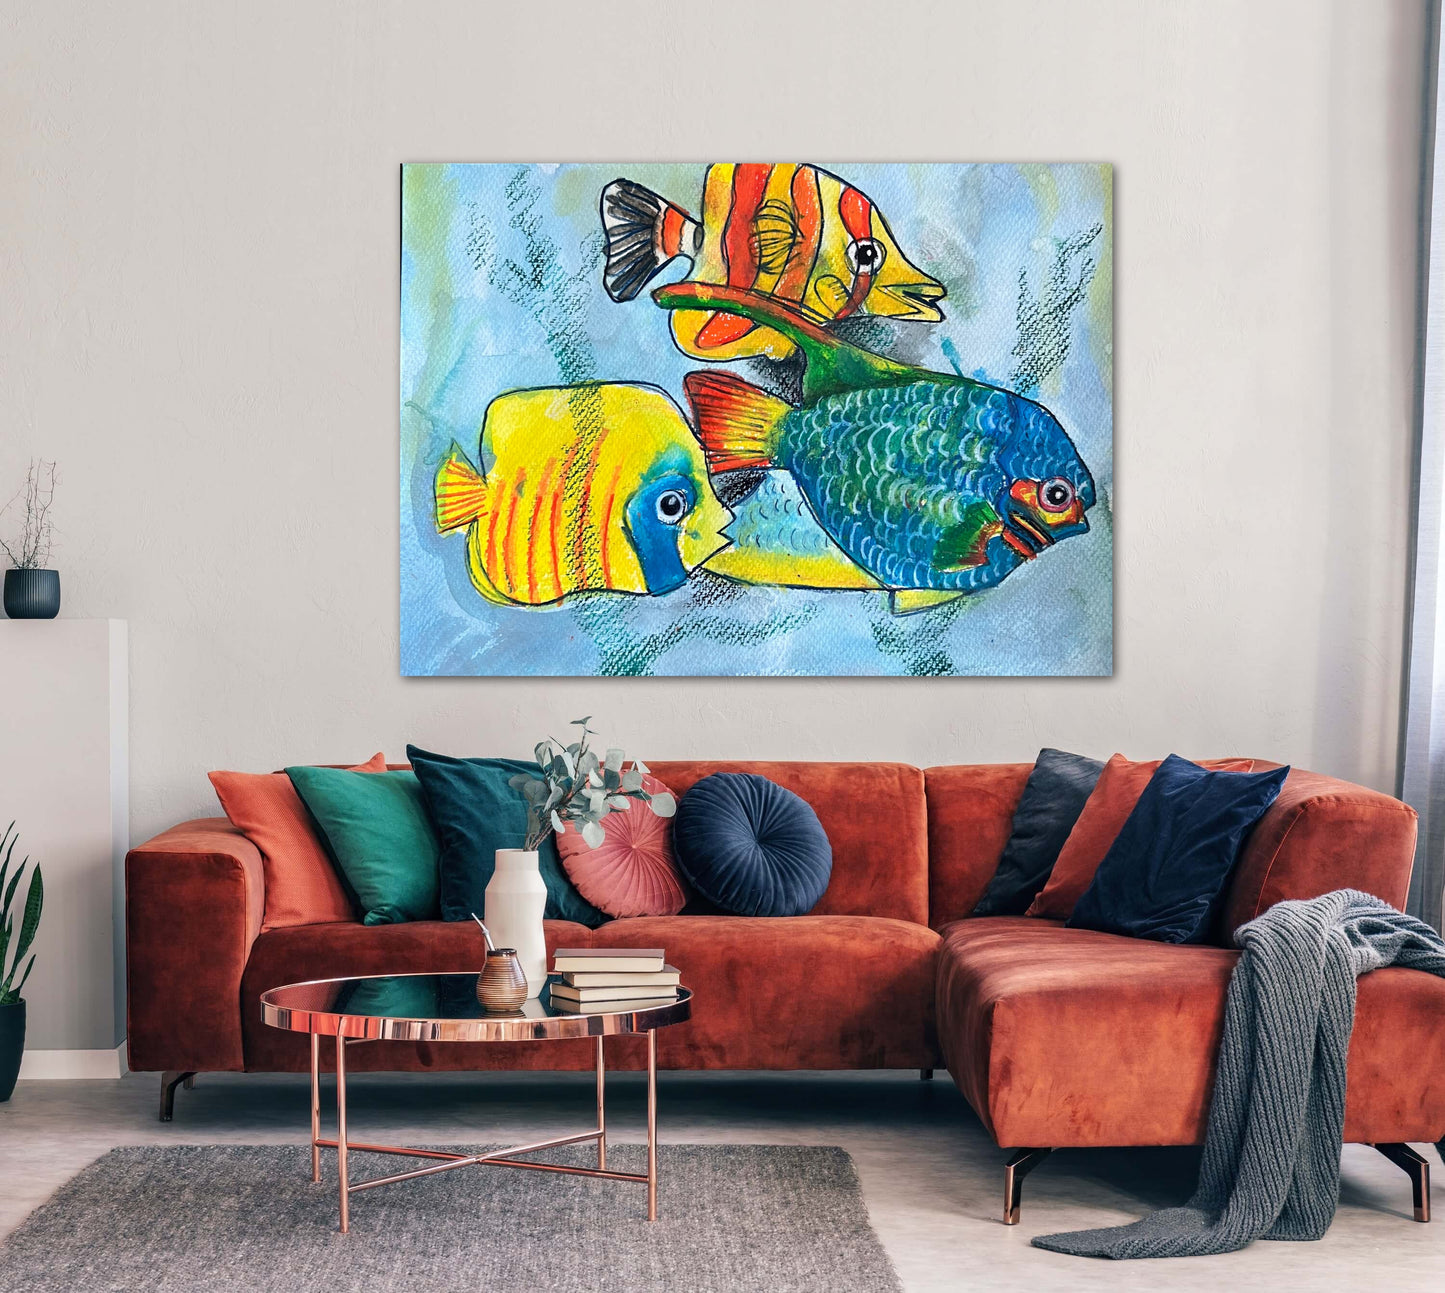 Three Colorful Fish - Print, Poster or Stretched Canvas Print in more sizes